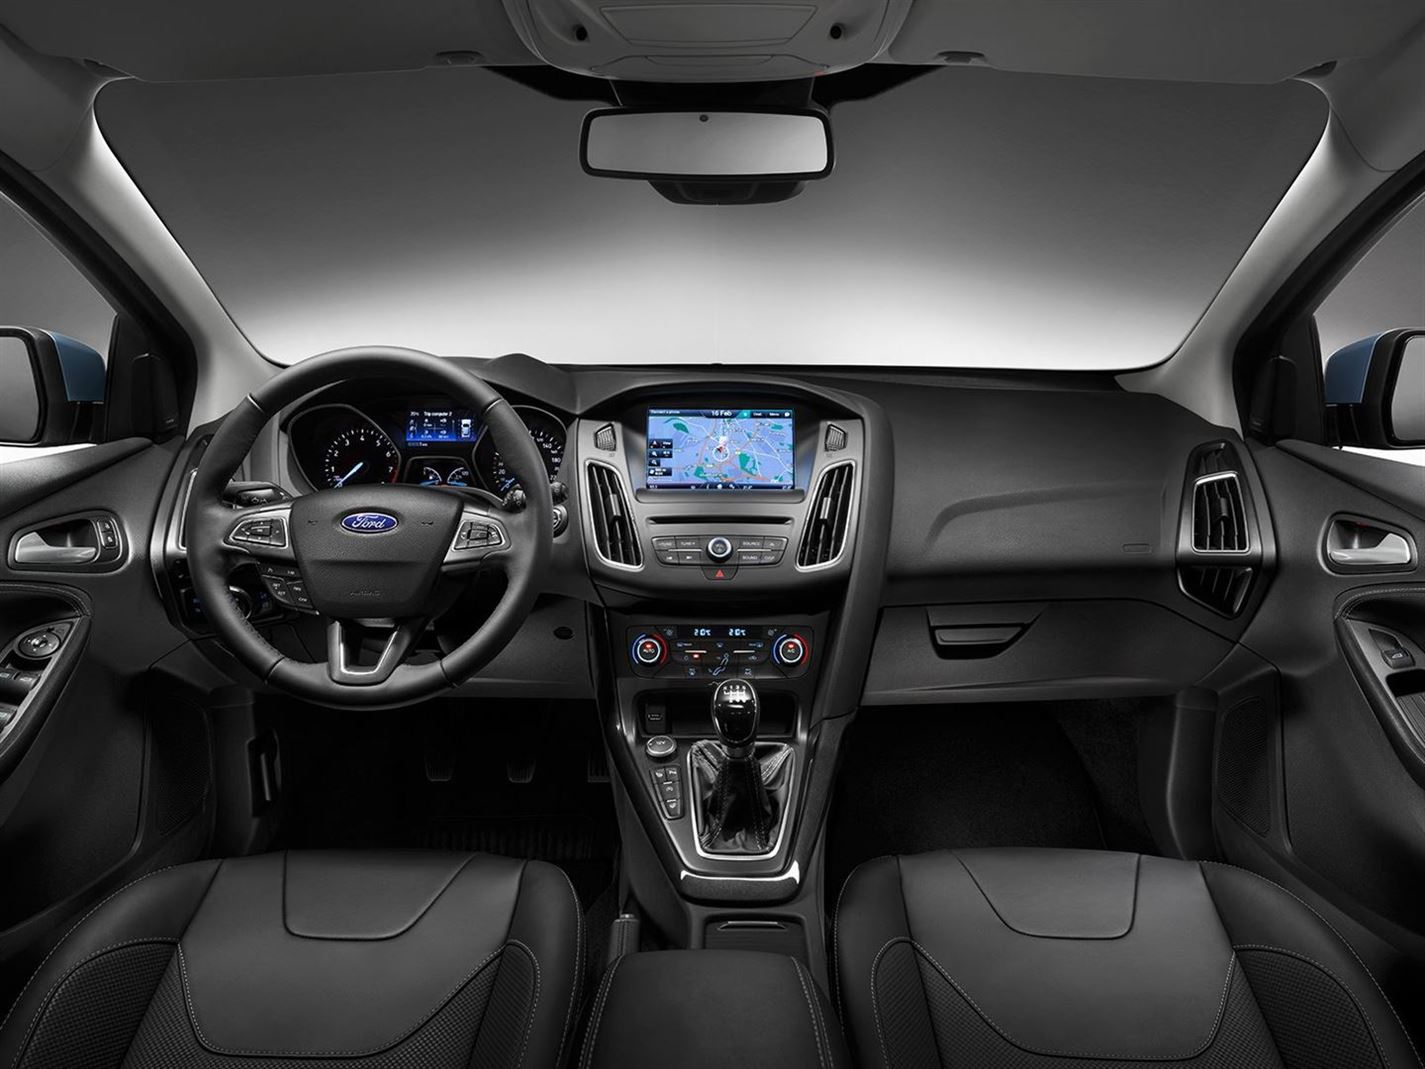 2015 Ford Focus Reviews Ratings Prices  Consumer Reports